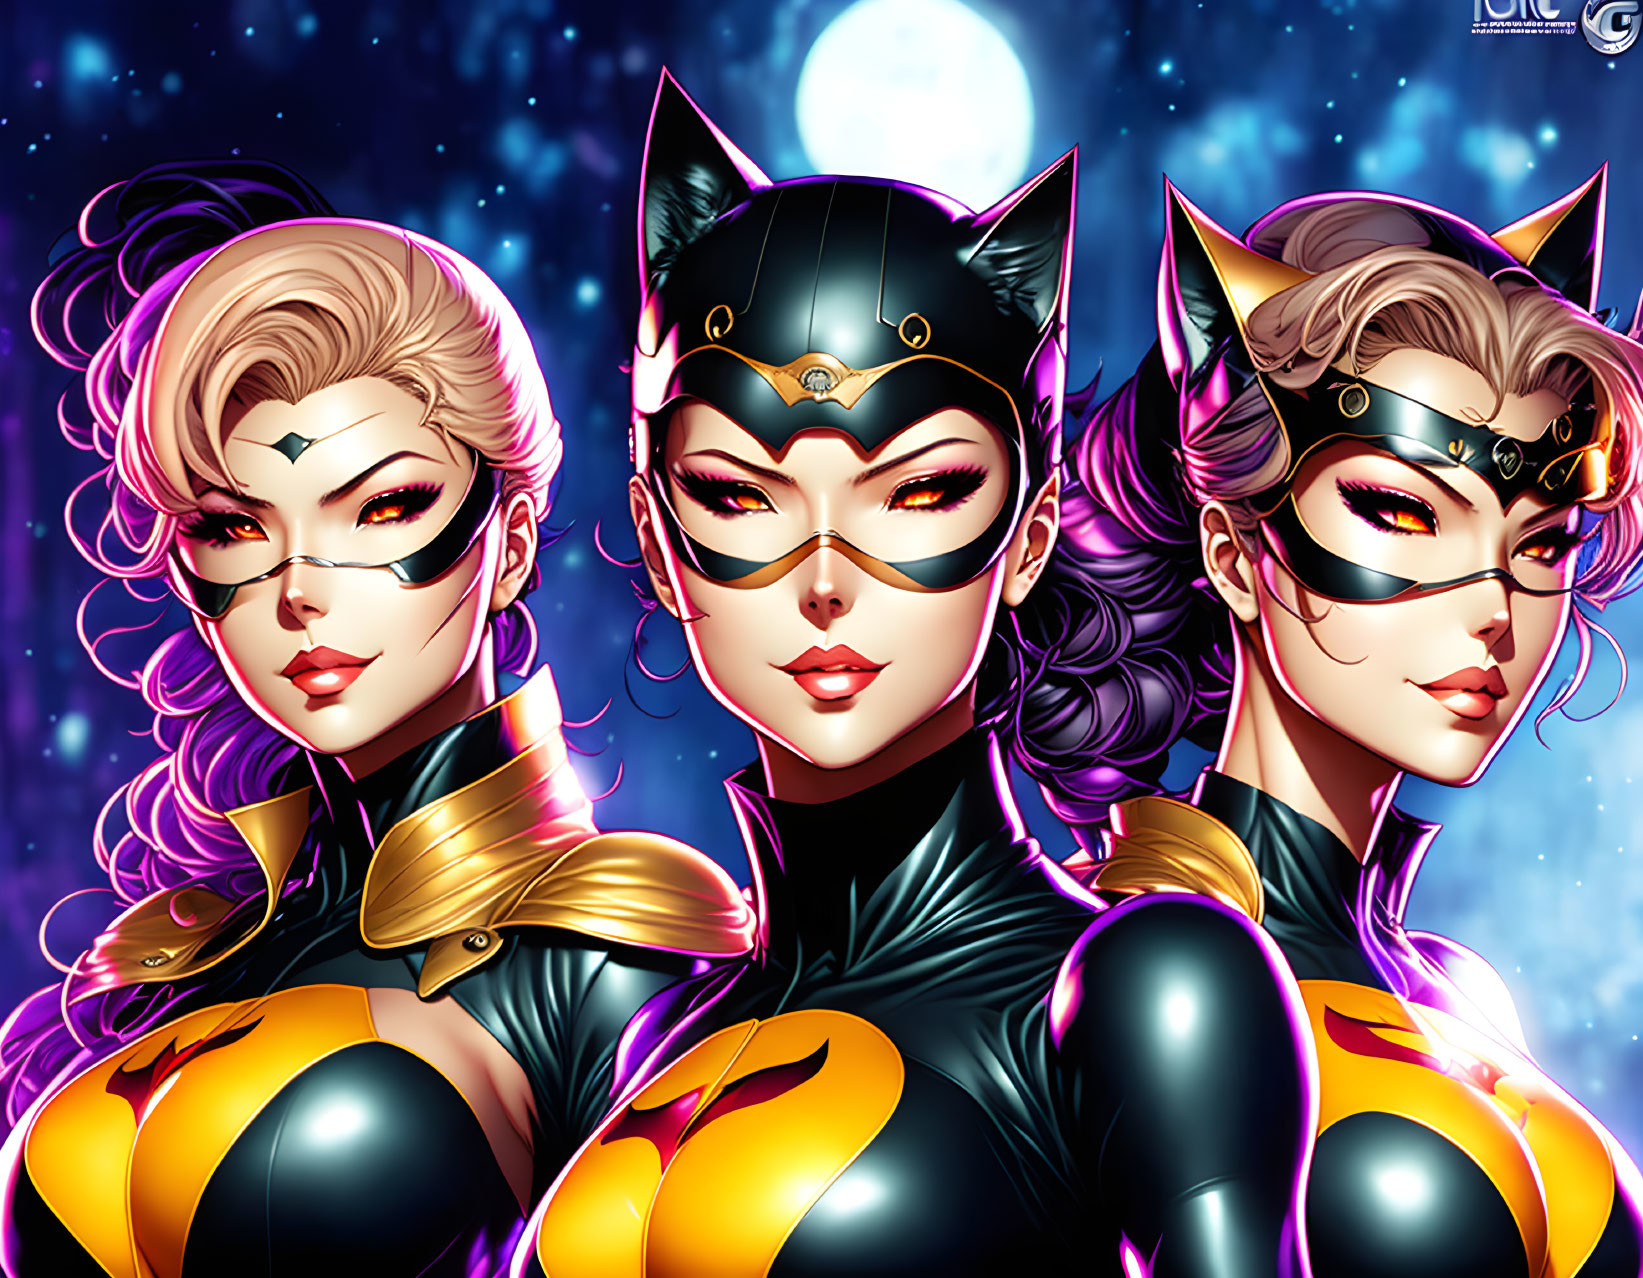  A Famous Anime Female Catwoman Team by DC